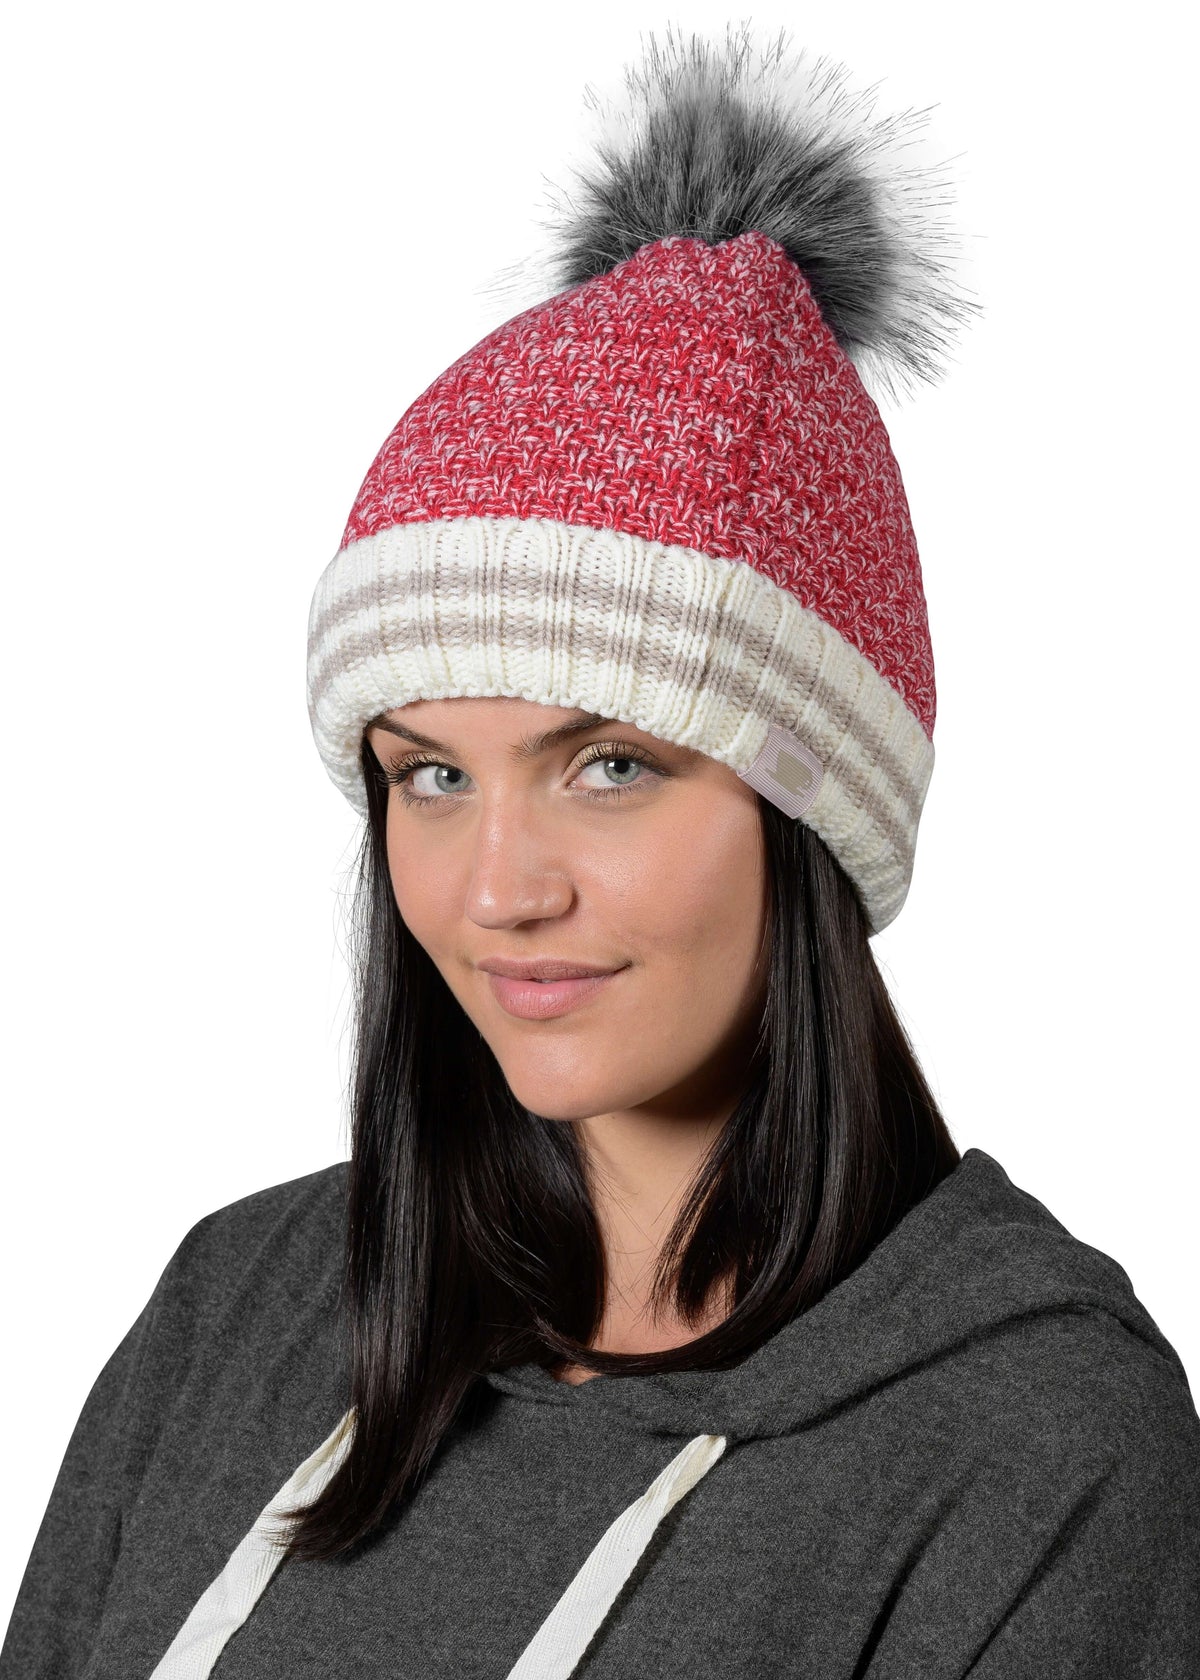 Canadiana Knit Hat - Deep Red - LATTELOVE Co.